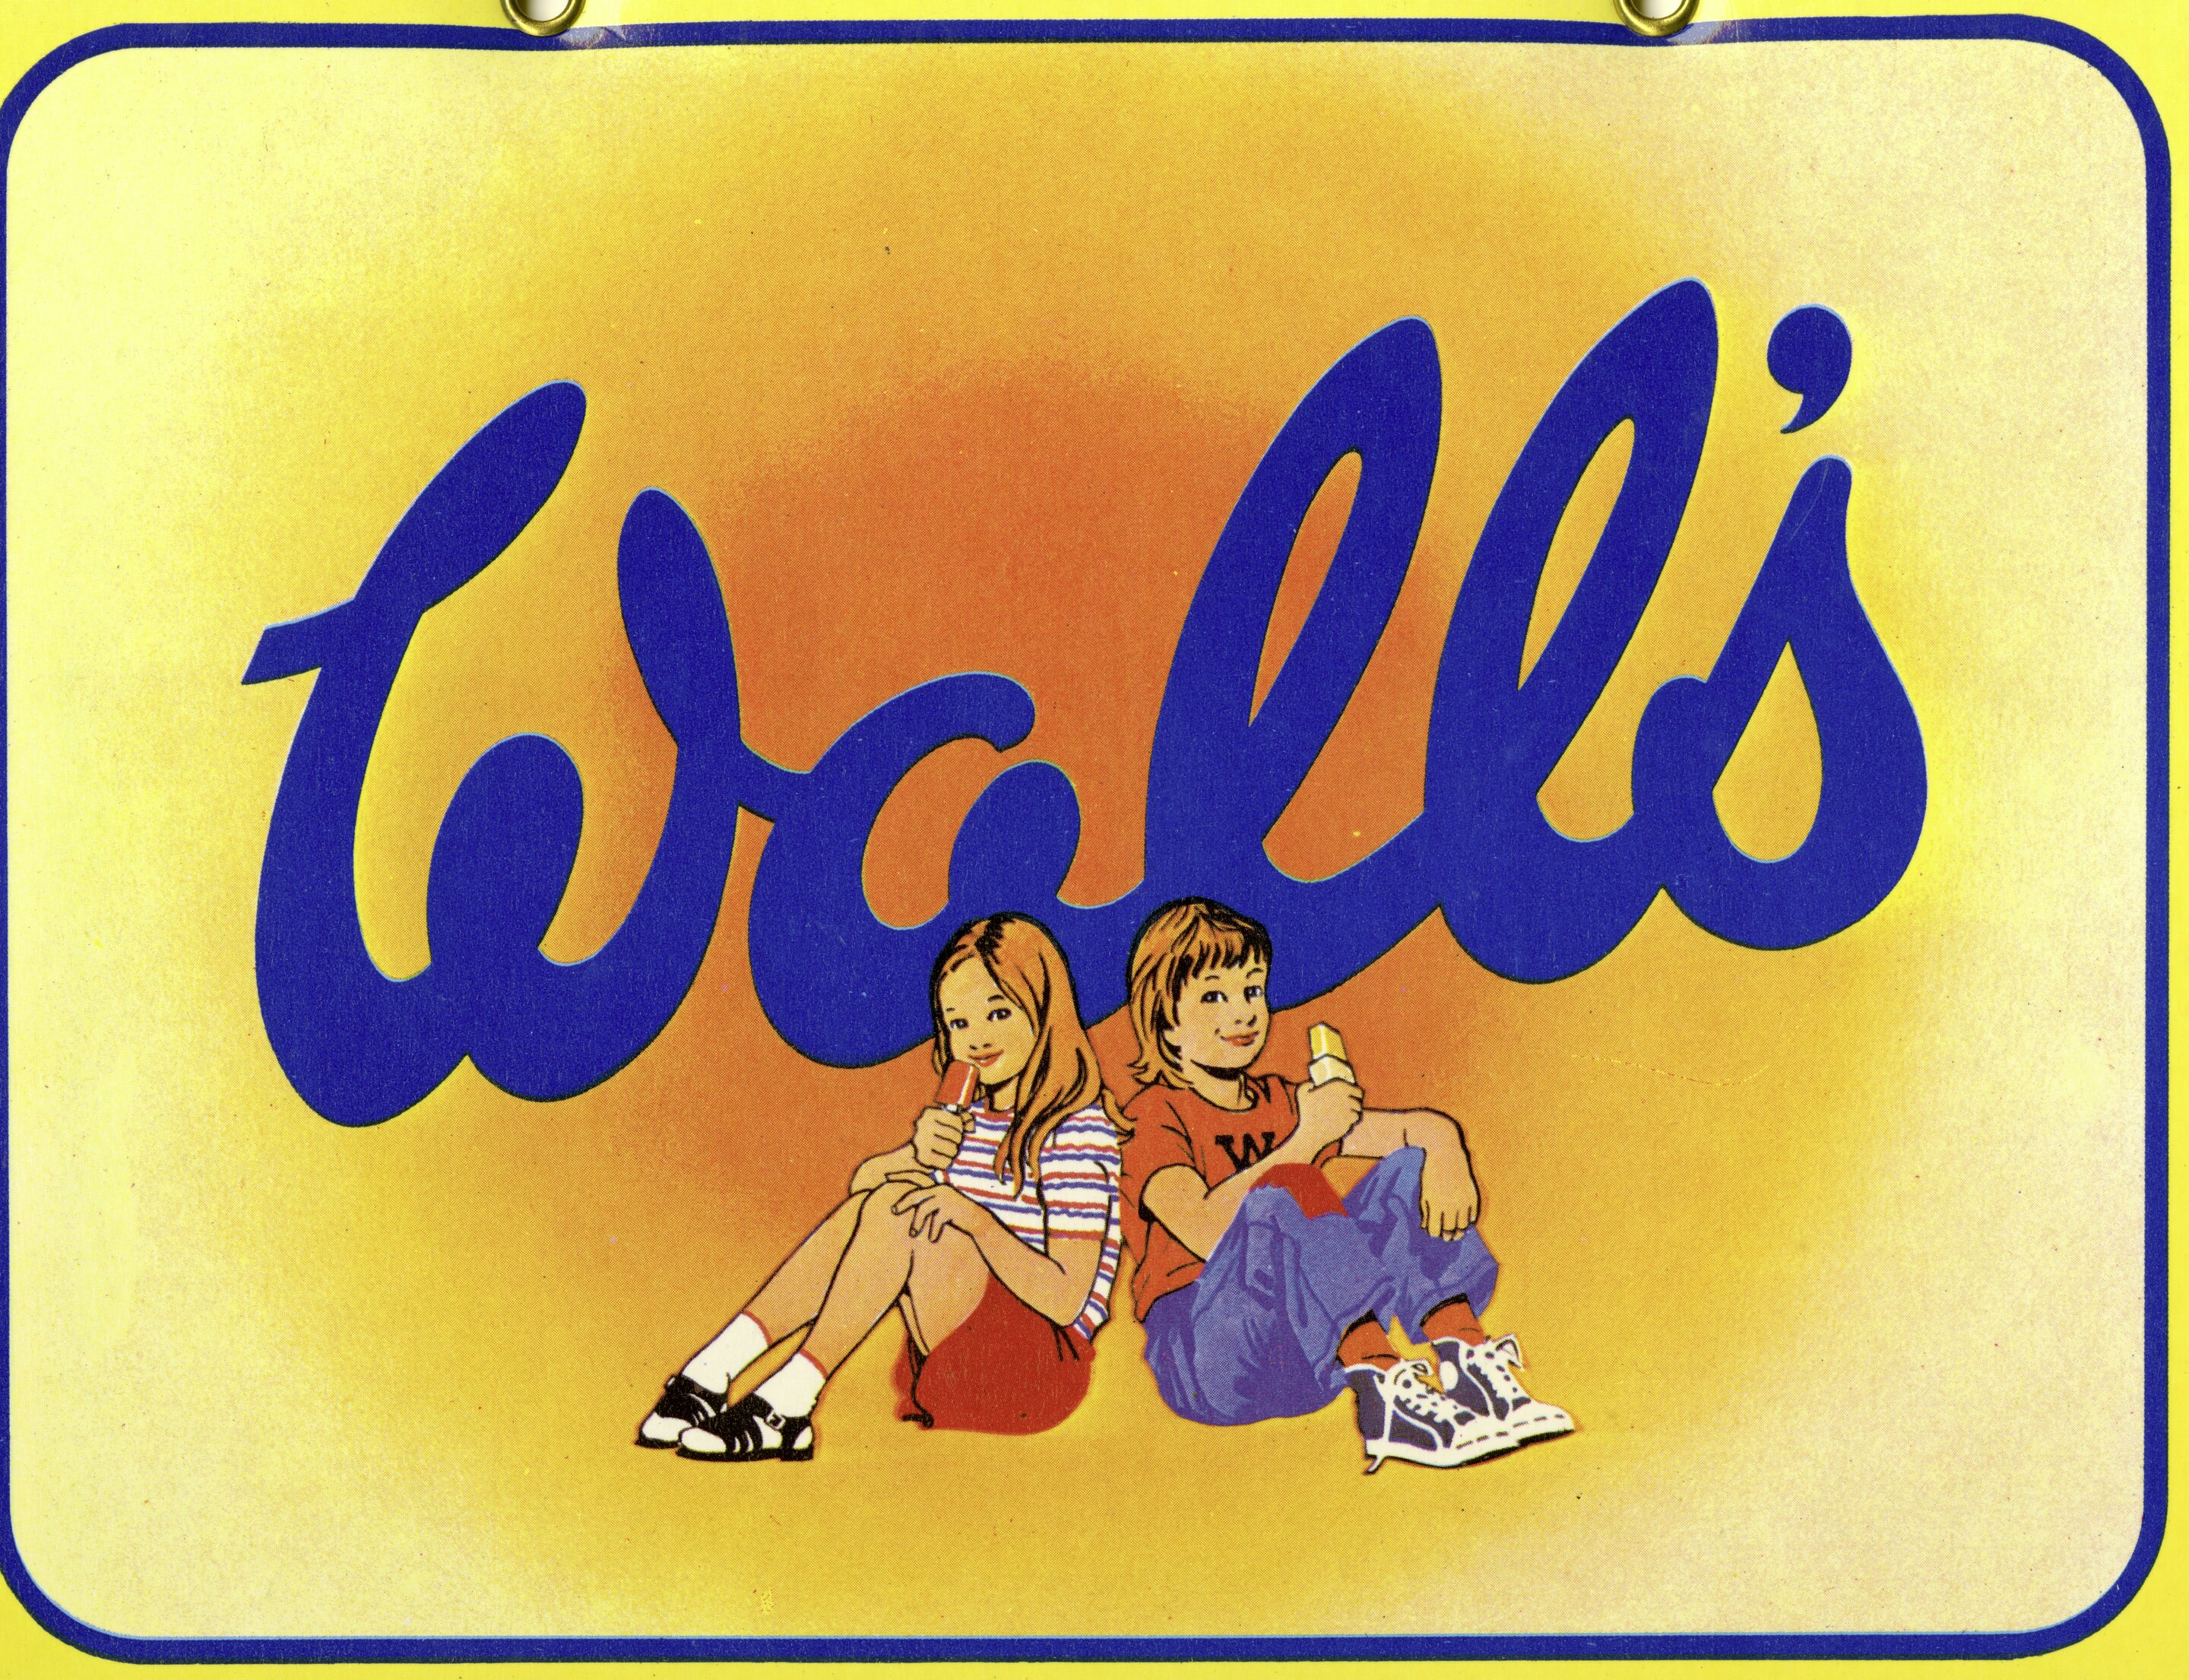 Old Wall's logo in blue with yellow background and image of 2 kids sitting in front